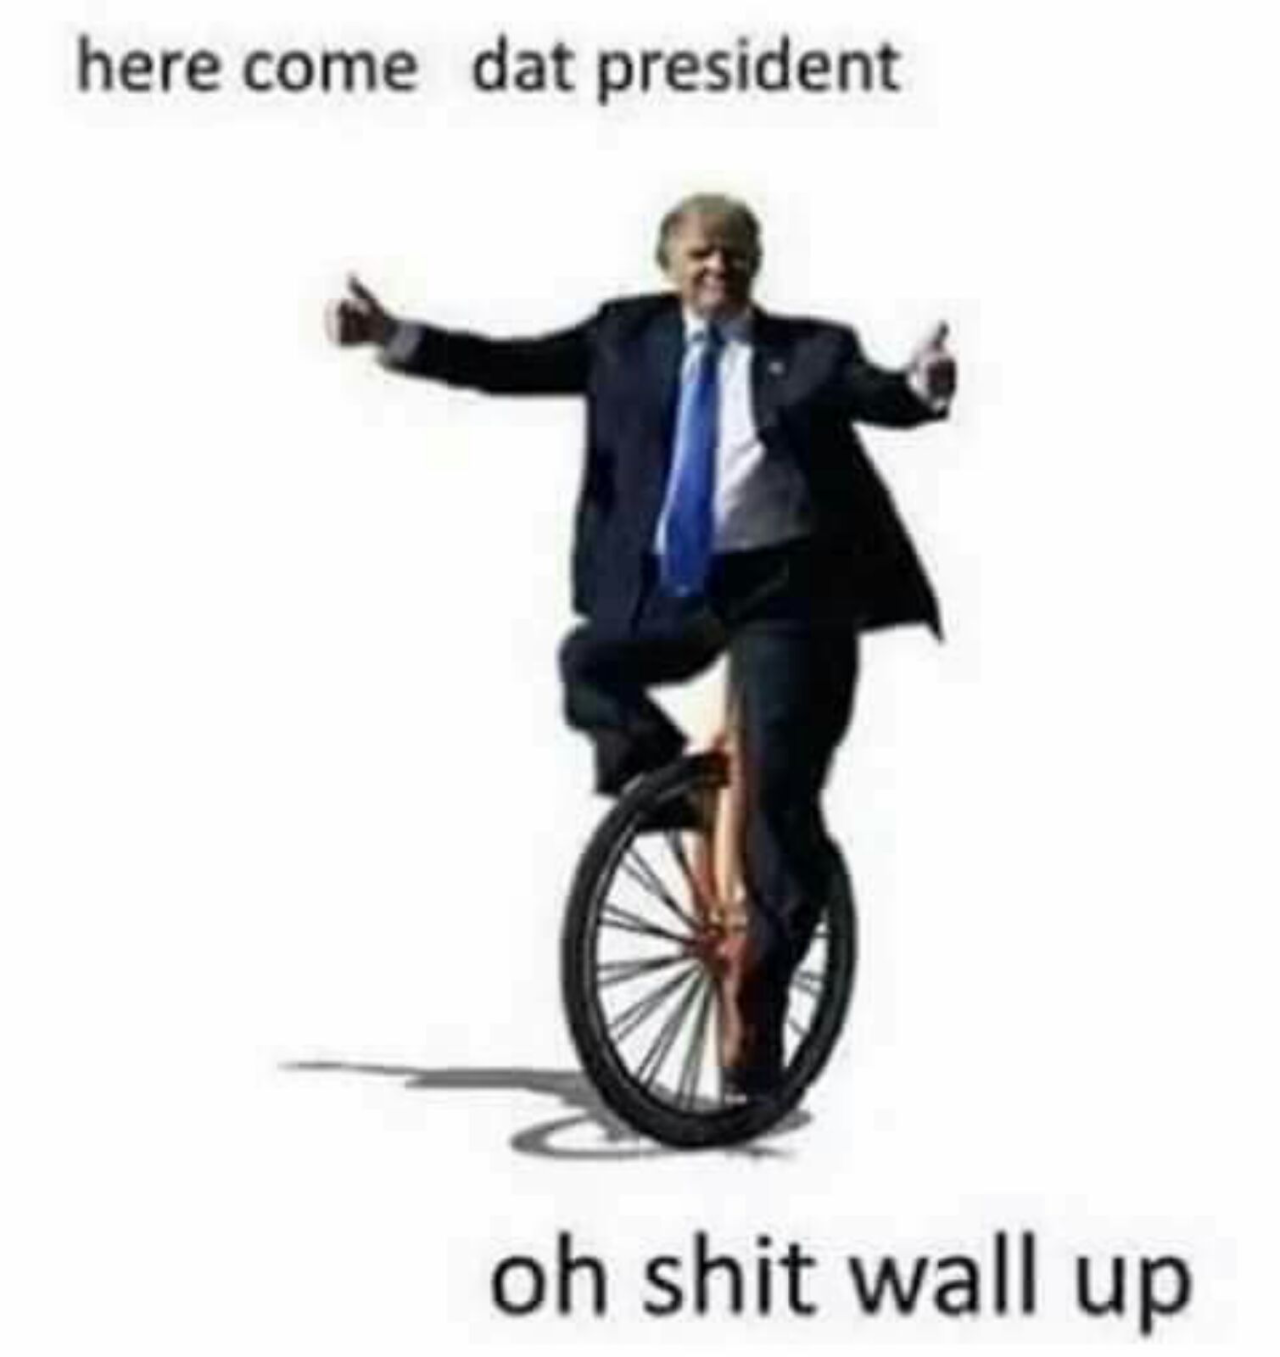 Oh shit wall up